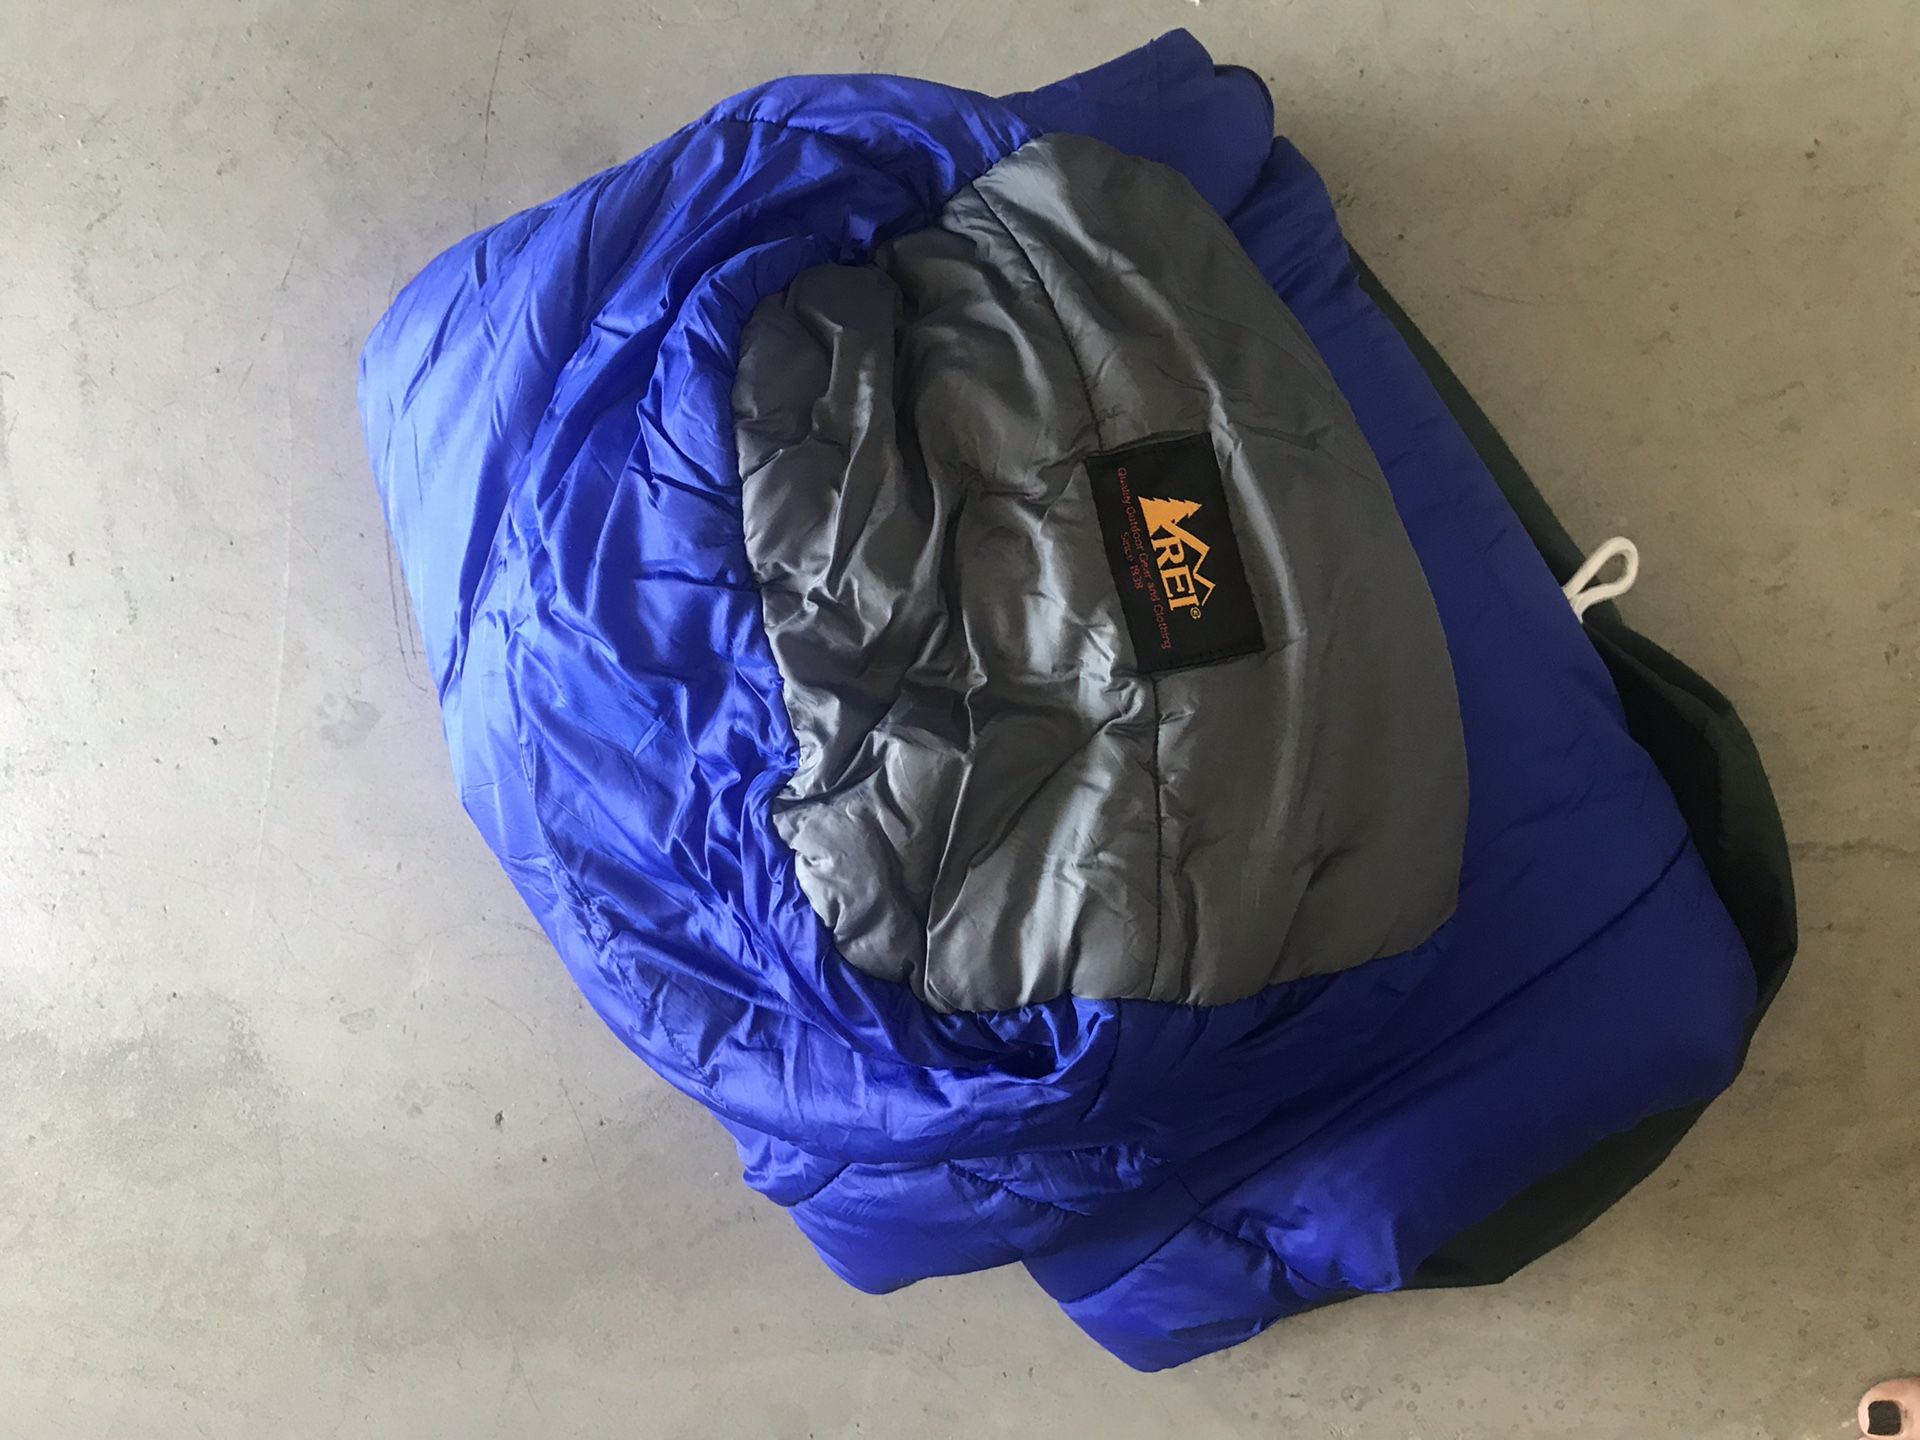 REI mummy sleeping bag - blue and grey with bag. 15-29 degree temp rating